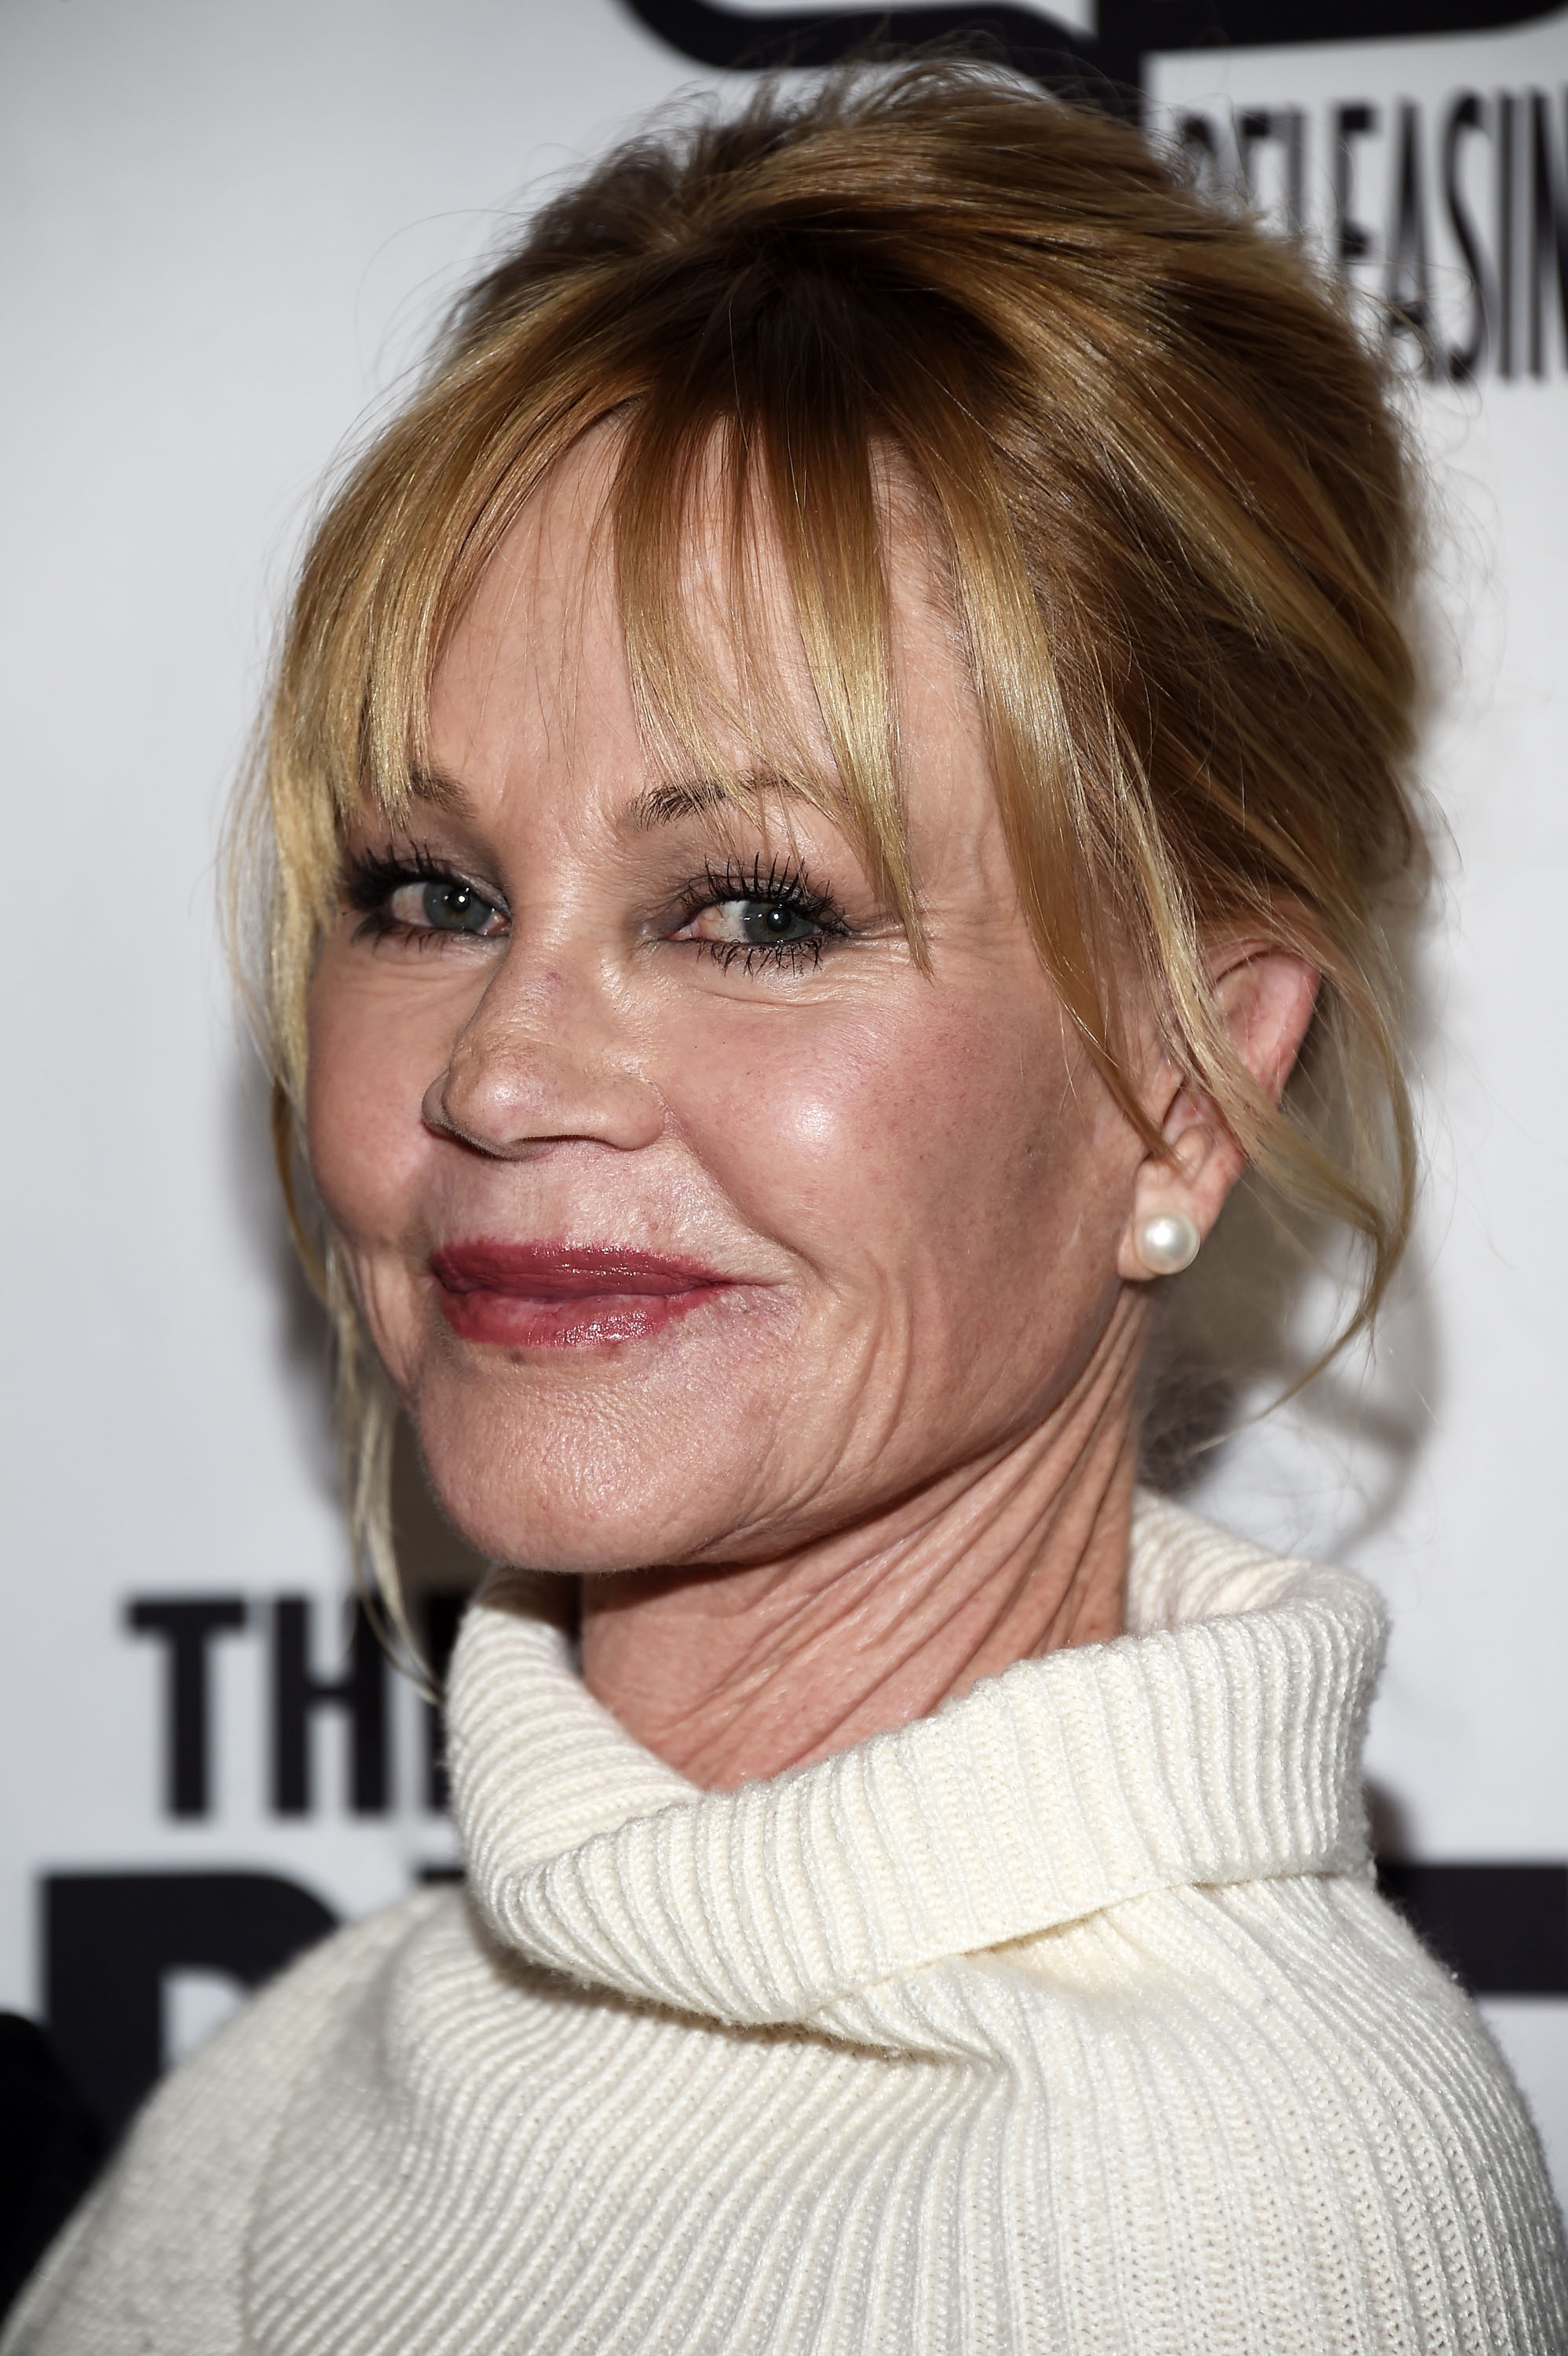 Melanie Griffith at the premiere of "The Pirates of Somalia" in Hollywood, California, on December 6, 2017 | Source: Getty Images